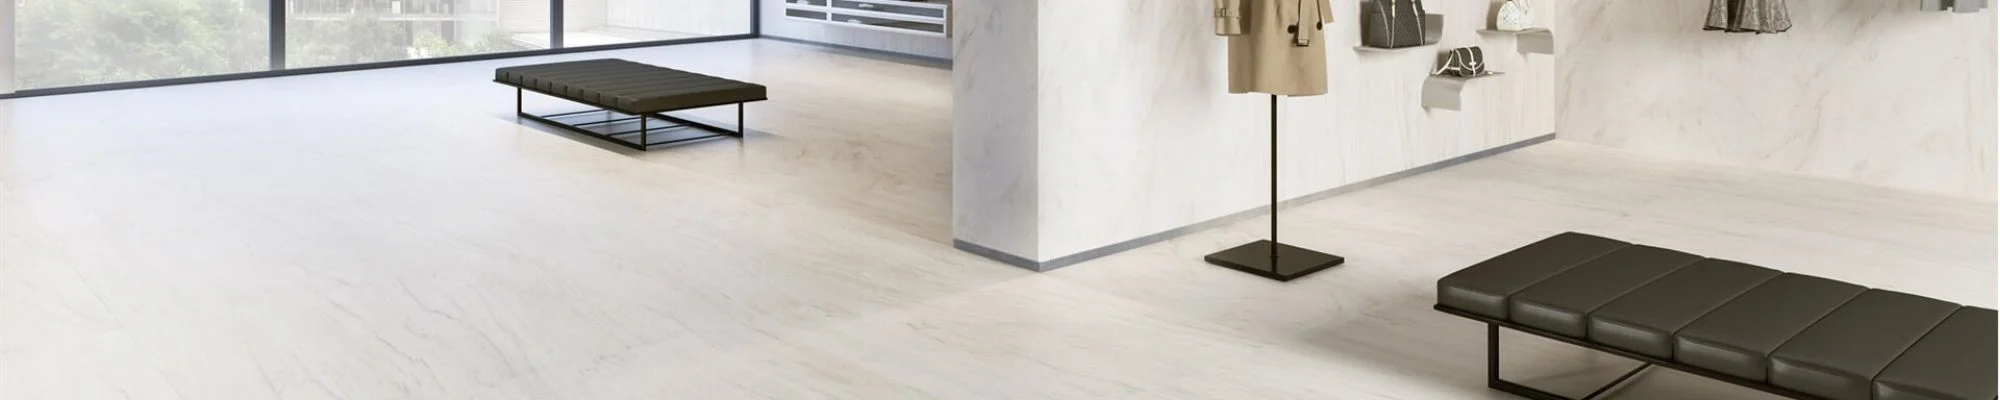 Laminate floor care advice from Tiles in Style LLC - your local flooring store in South Holland, IL